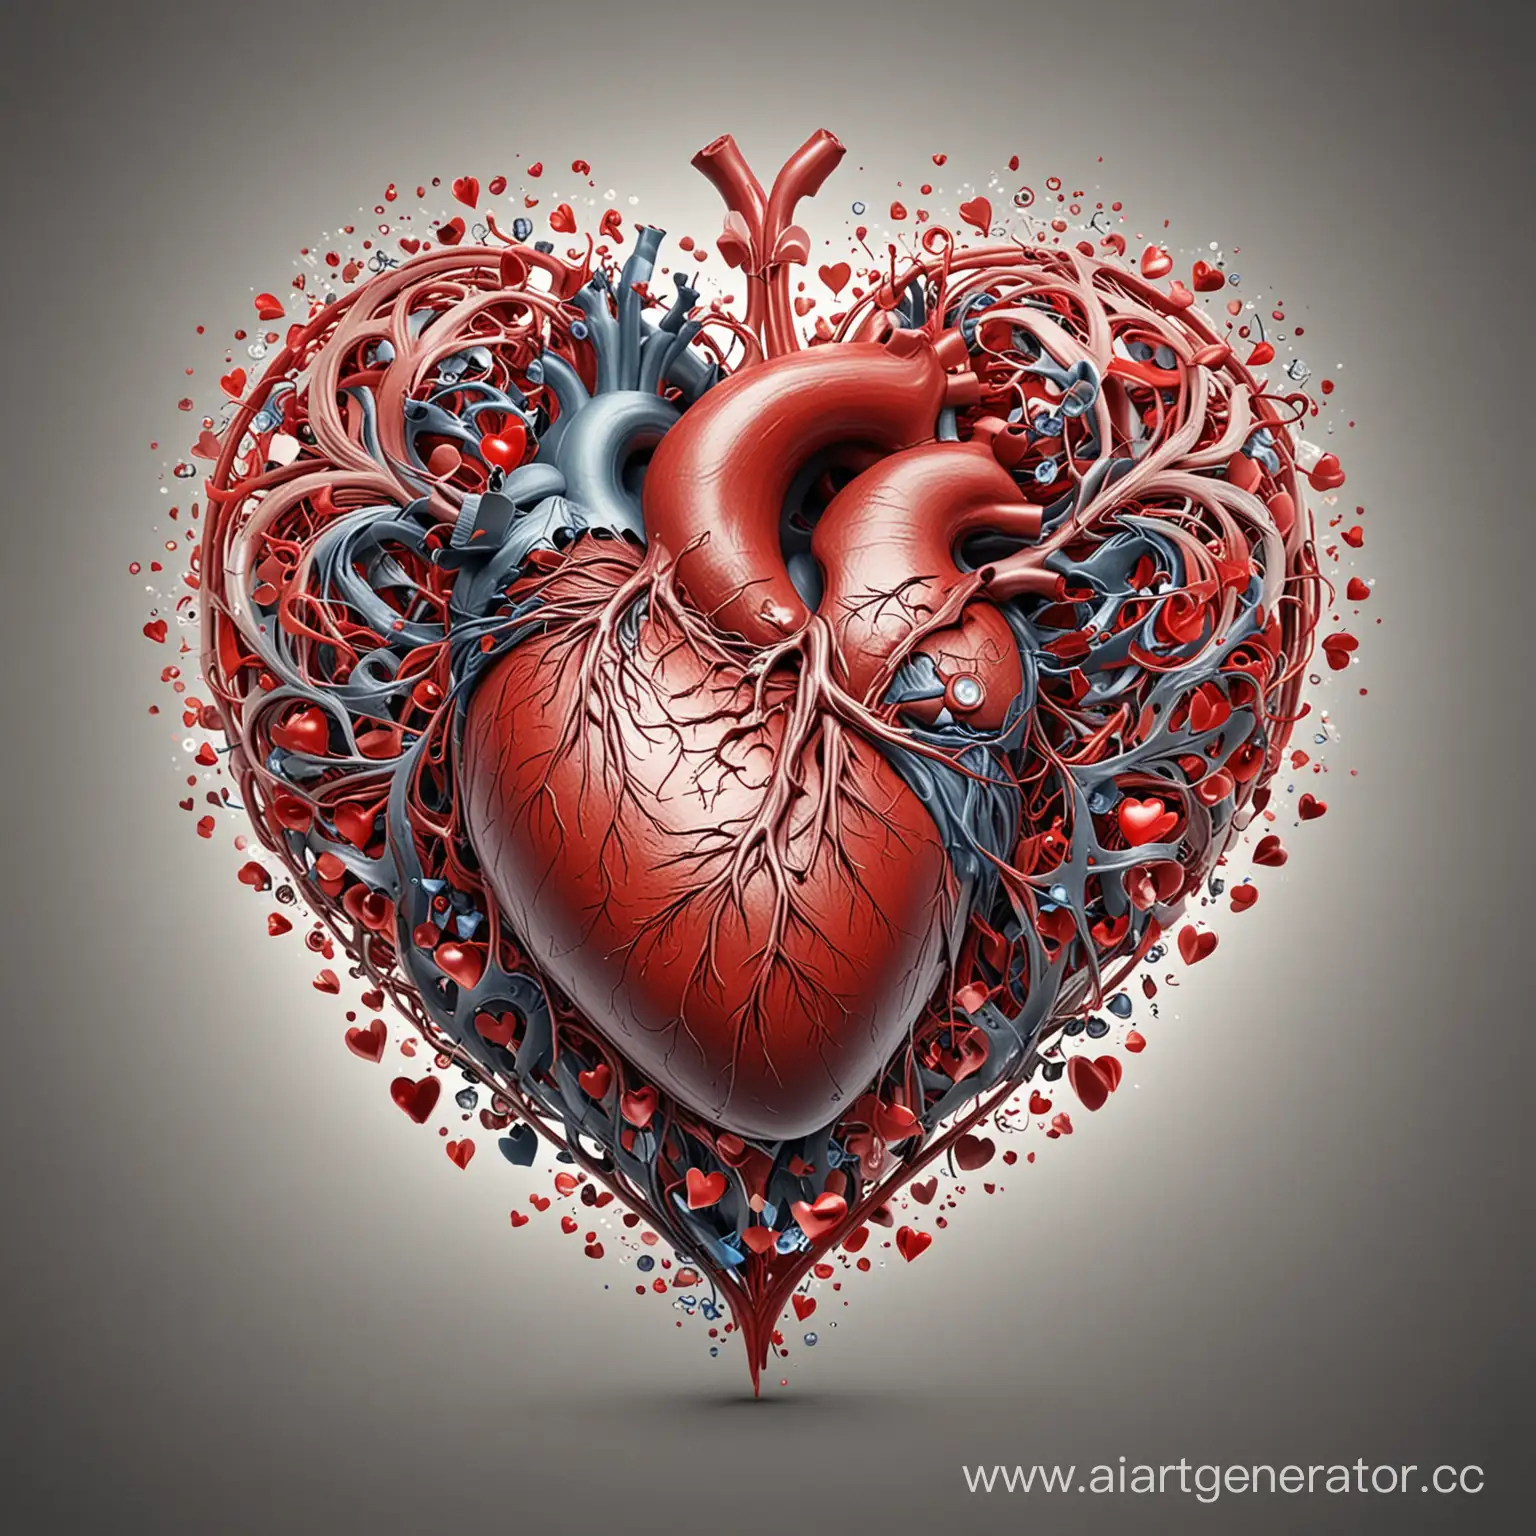 Human-Heart-Anatomy-Illustration-Detailed-Internal-Structure-of-the-Cardiovascular-System